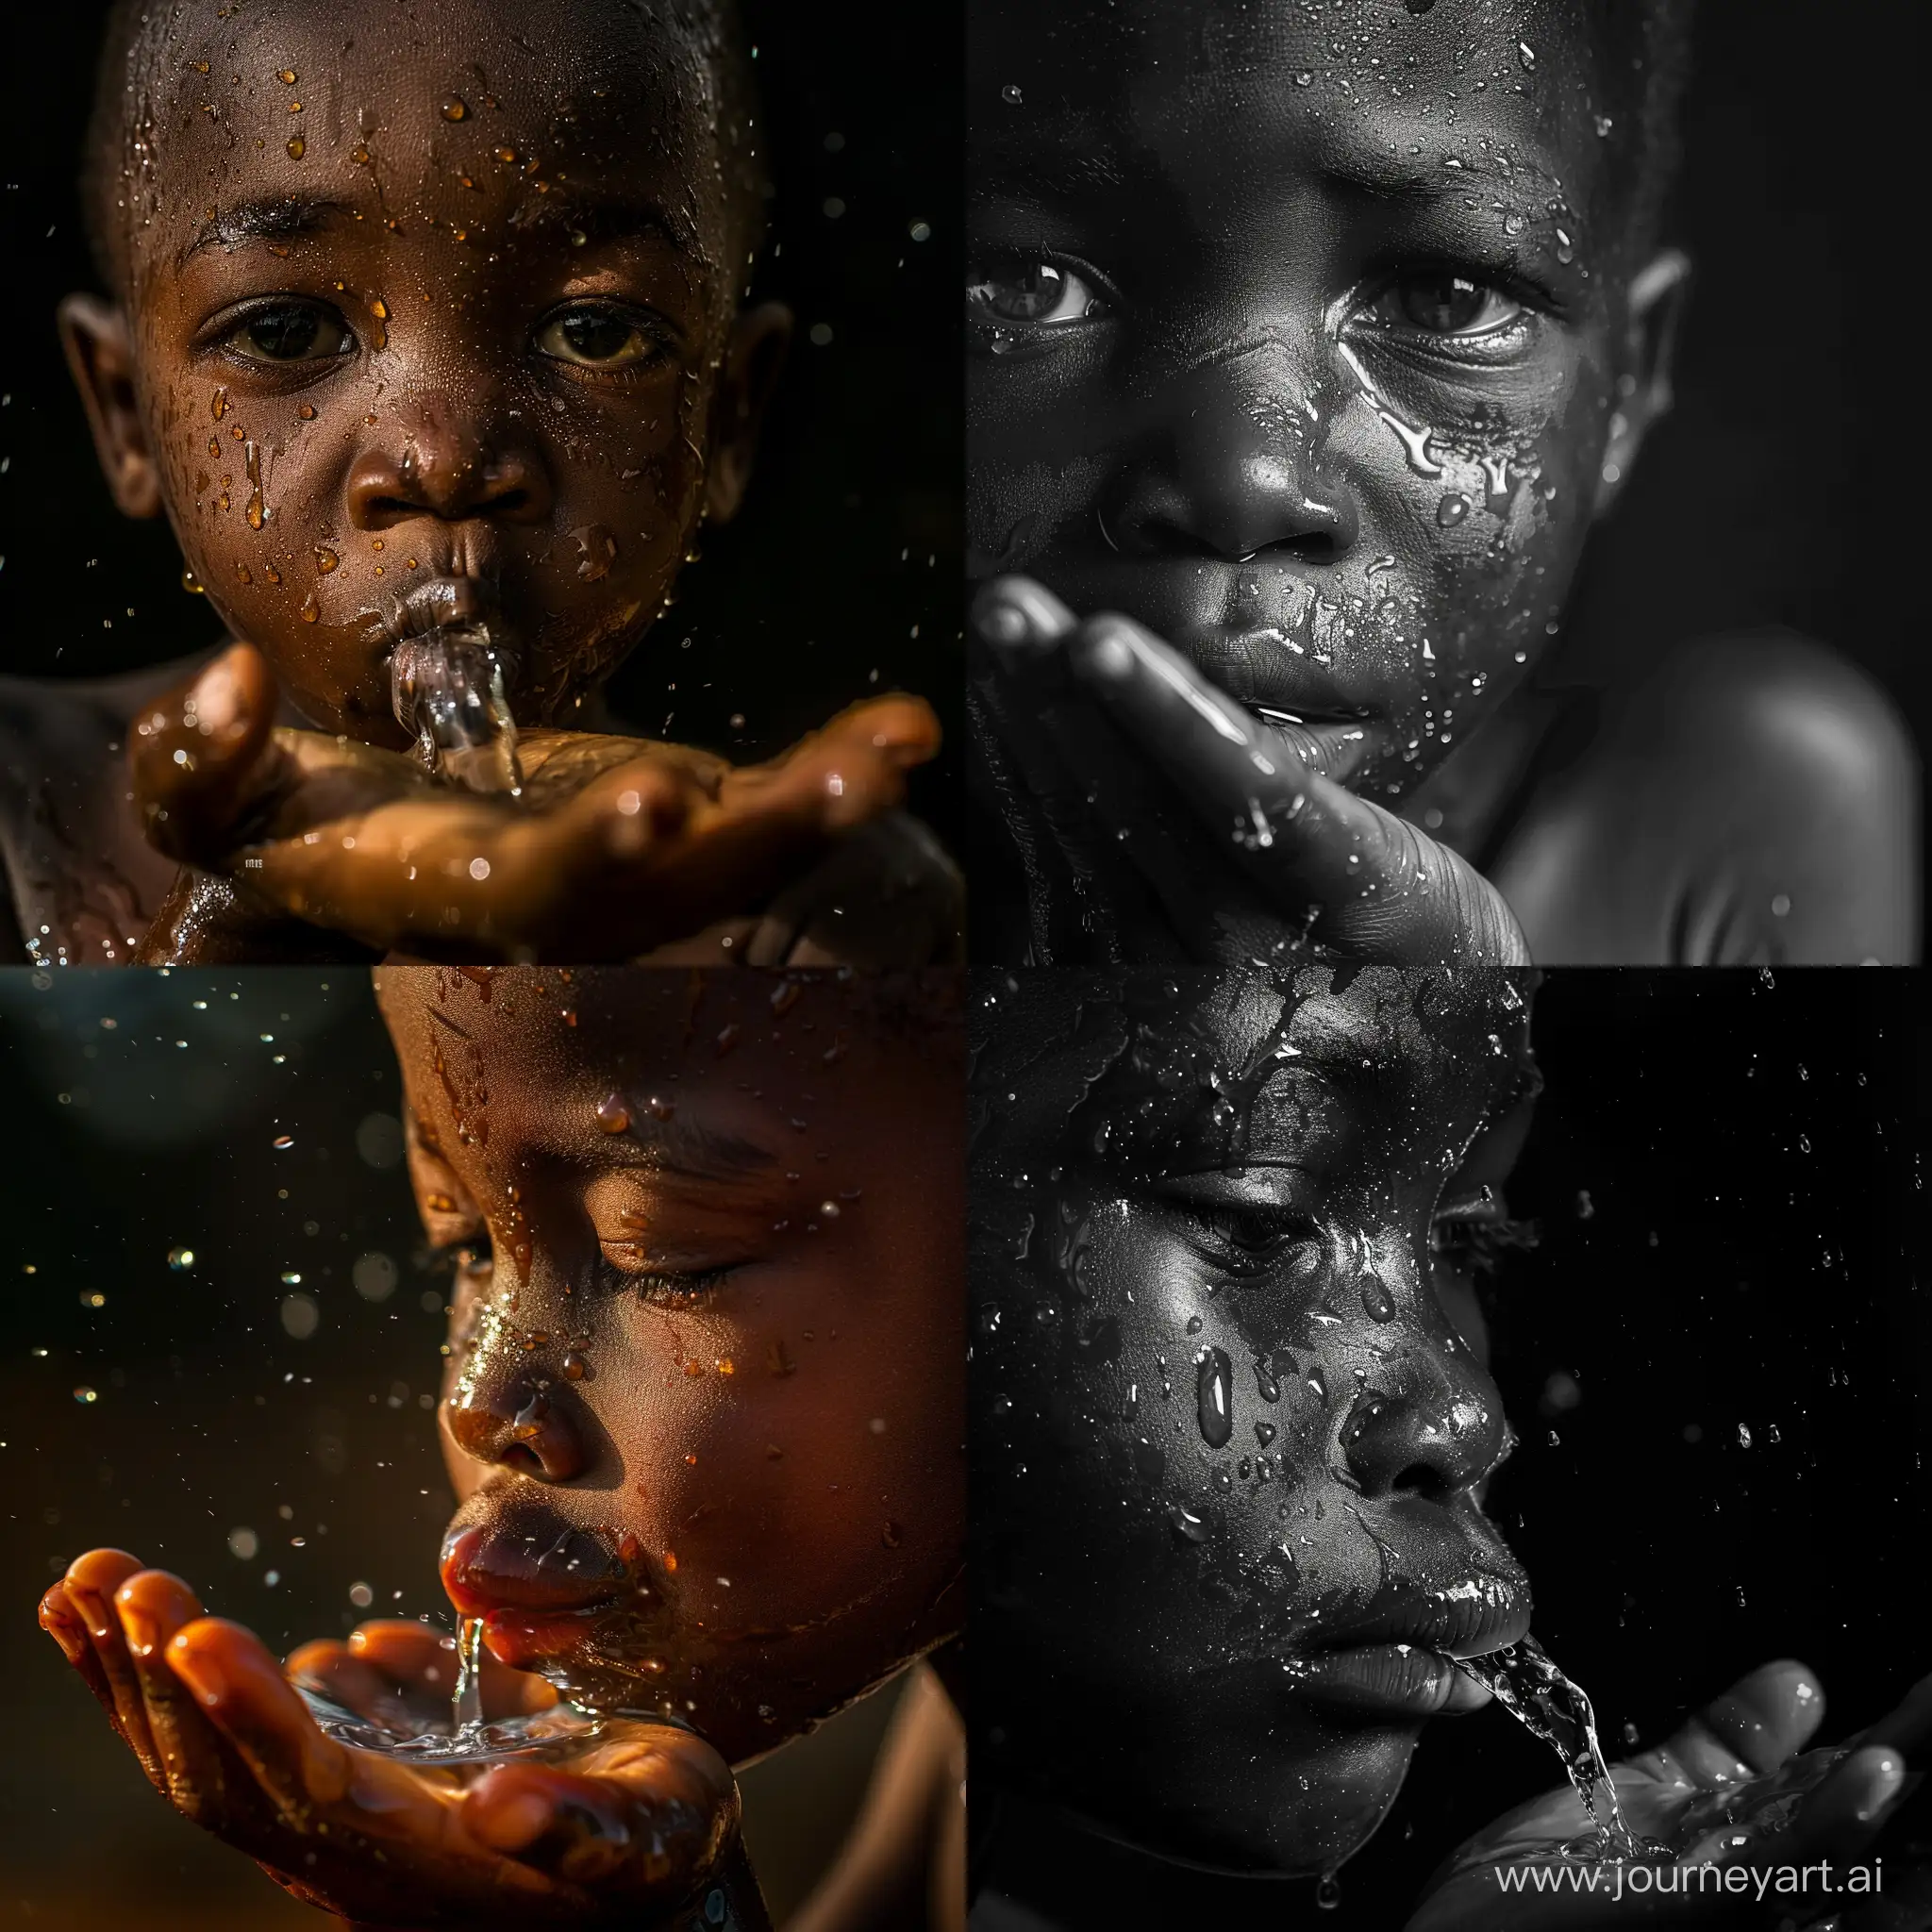 Close up of an African boy facing the camera, drinking from his palm and there’s water droplets on his face.